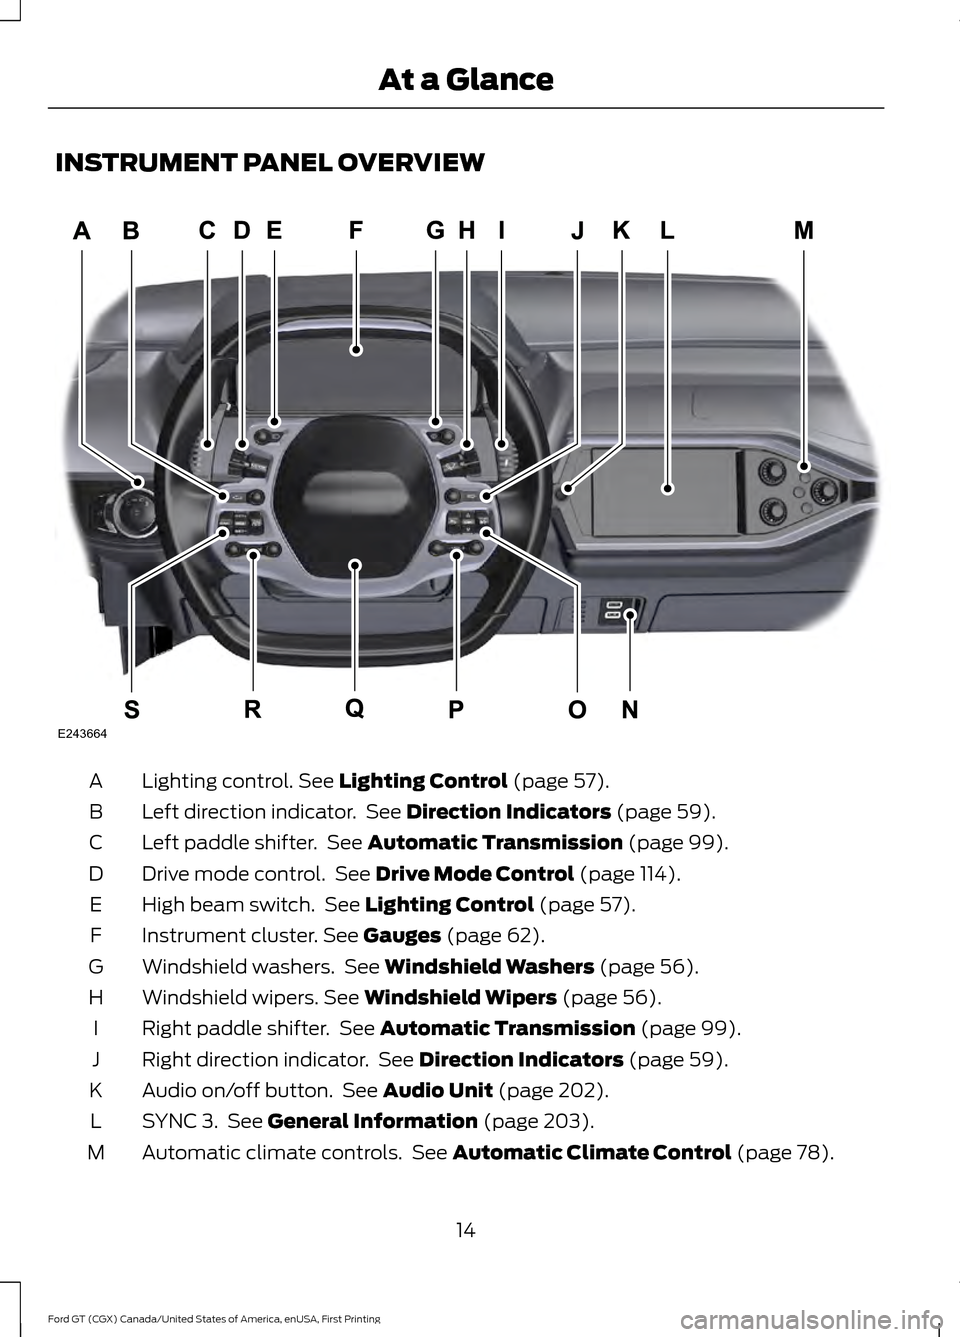 FORD GT 2017 2.G Owners Manual INSTRUMENT PANEL OVERVIEW
Lighting control. See Lighting Control (page 57).
A
Left direction indicator.  See 
Direction Indicators (page 59).
B
Left paddle shifter.  See 
Automatic Transmission (page 